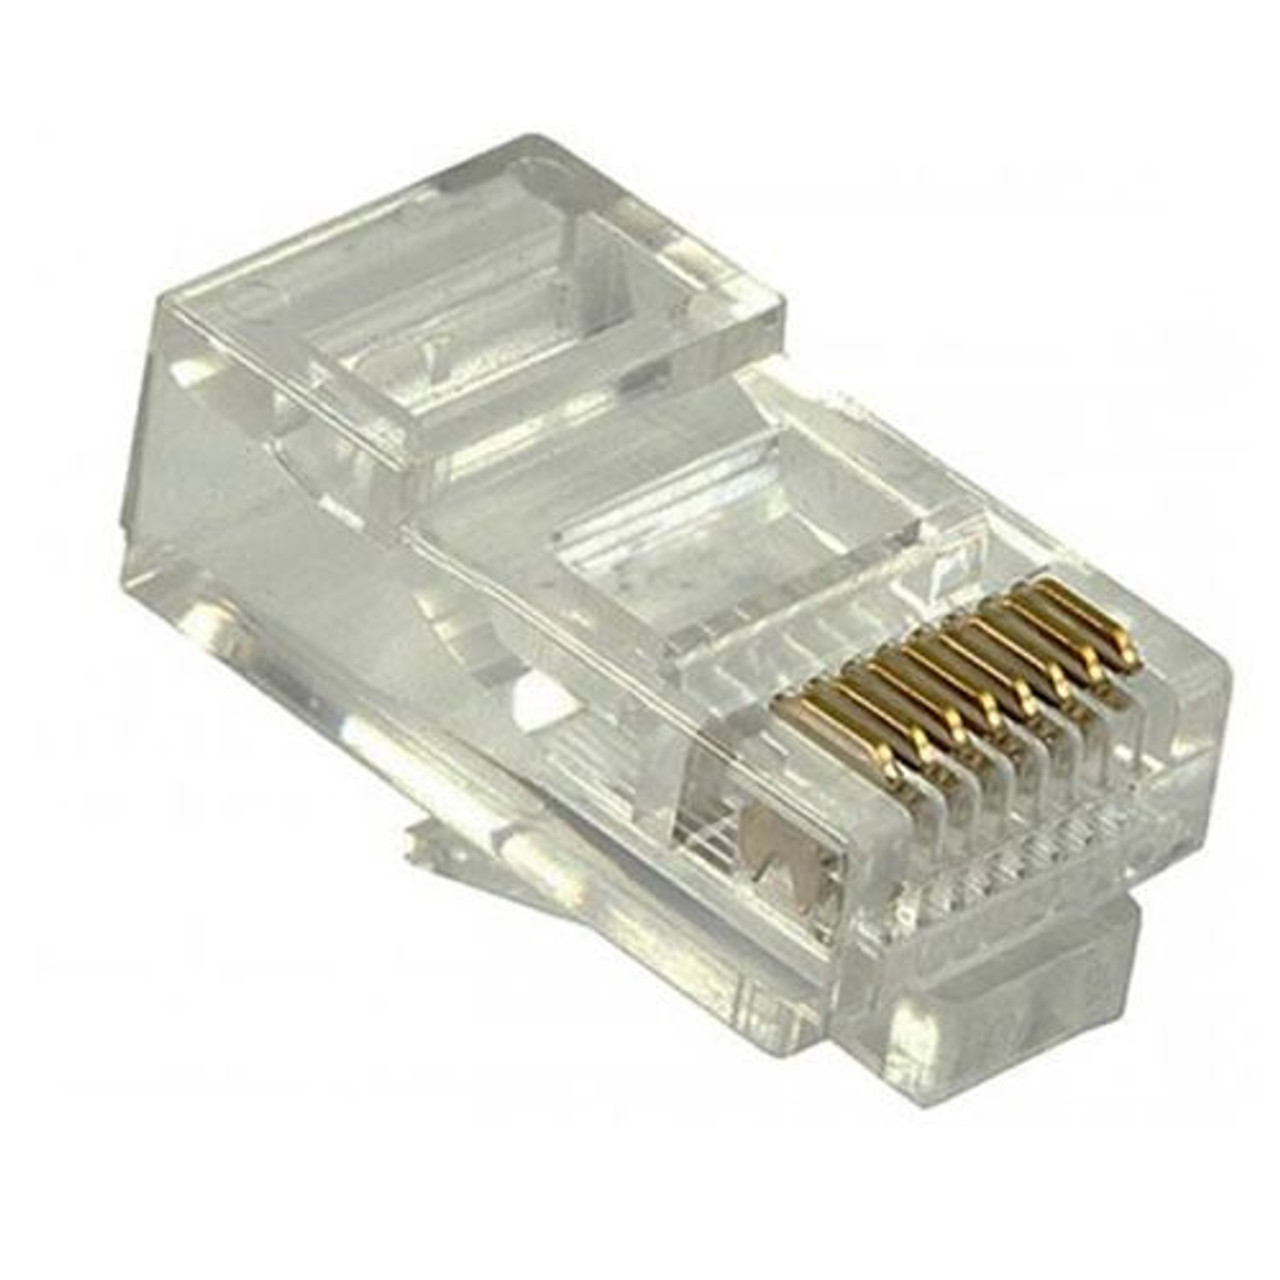 Eagle CAT5e Modular PLug Network Connector 100 Pack Round Stranded RJ45 8P8C 50 Micron Gold Plated Contacts 8P8C Round Stranded Connector 8 Pin Contacts Male Network Computer Ethernet